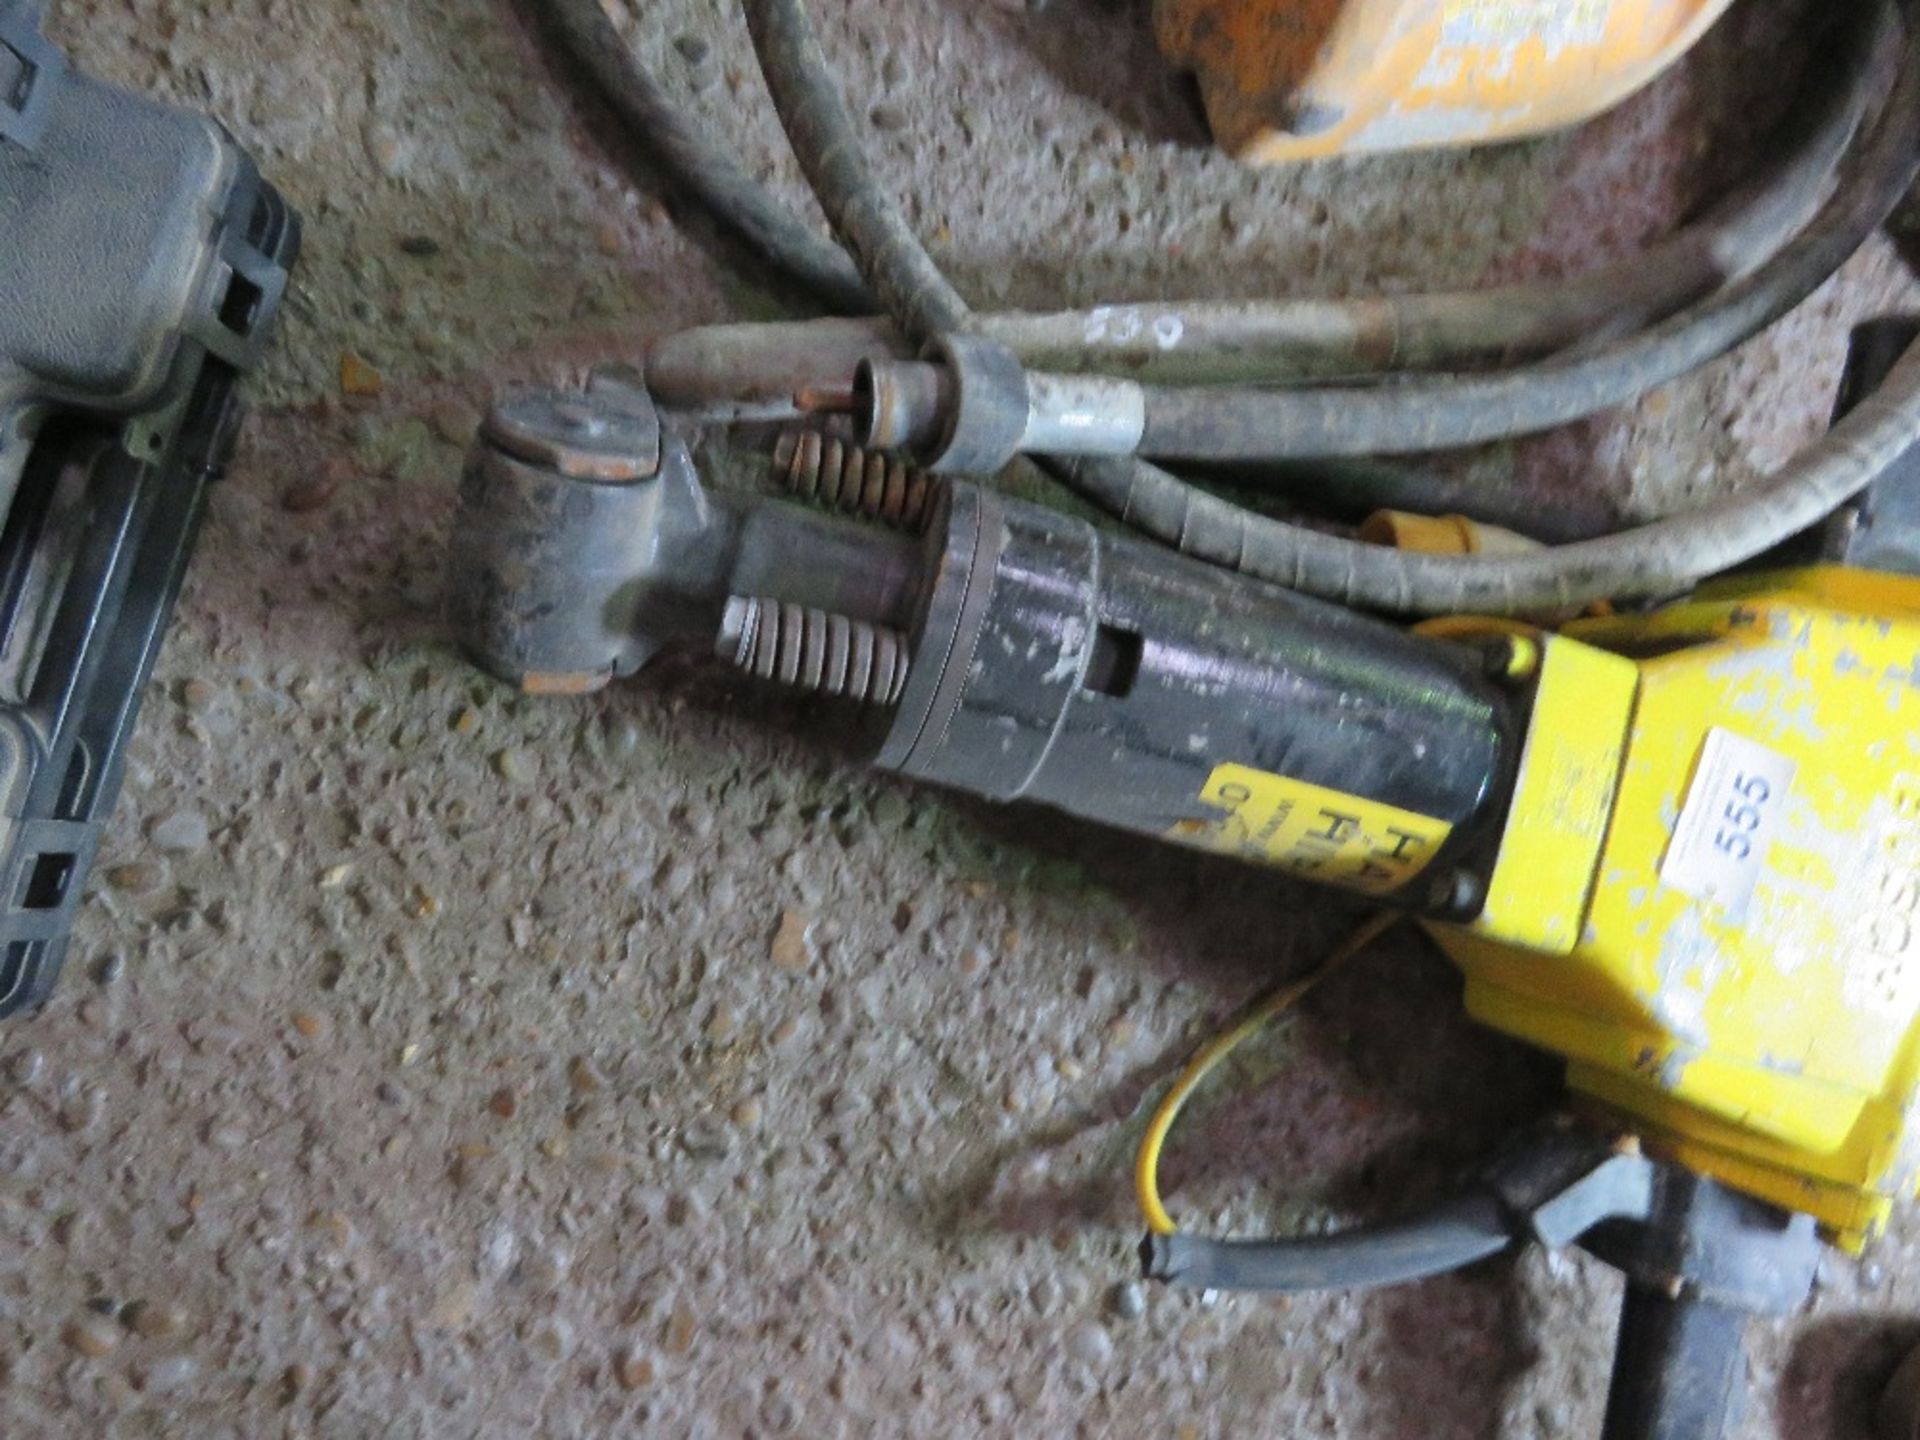 BOSCH 110VOLT UPRIGHT BREAKER, CONDITION UNKNOWN. - Image 2 of 2